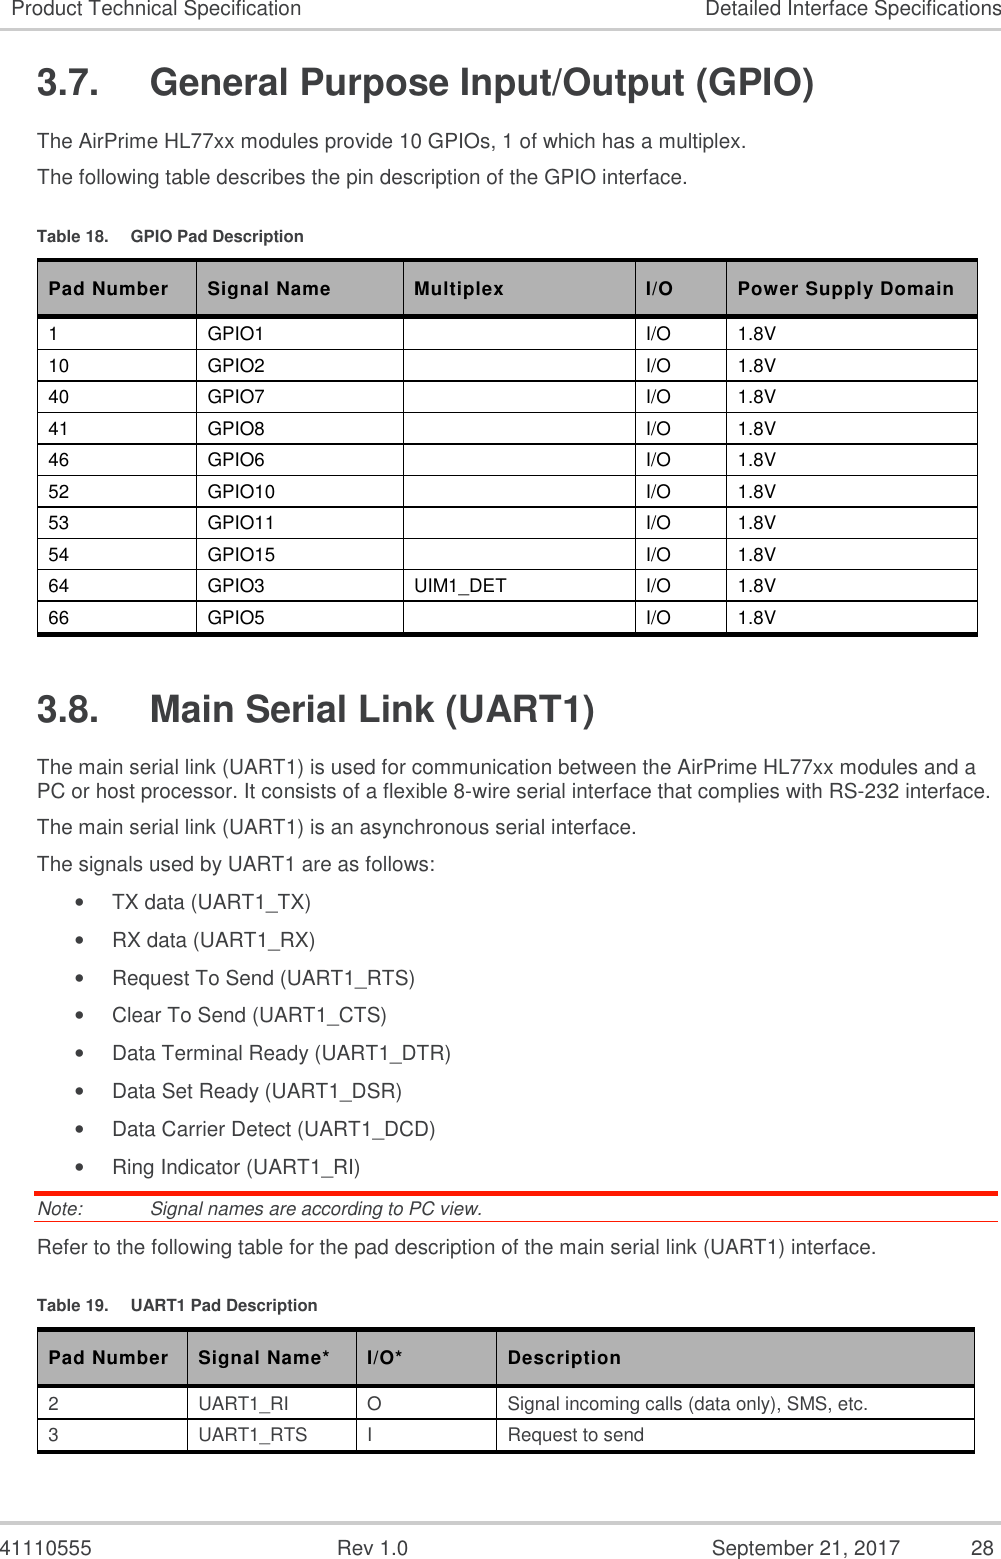   41110555  Rev 1.0  September 21, 2017  28 Product Technical Specification  Detailed Interface Specifications 3.7.  General Purpose Input/Output (GPIO) The AirPrime HL77xx modules provide 10 GPIOs, 1 of which has a multiplex.  The following table describes the pin description of the GPIO interface. Table 18.  GPIO Pad Description Pad Number Signal Name Multiplex I/O Power Supply Domain 1  GPIO1    I/O  1.8V 10  GPIO2    I/O  1.8V 40  GPIO7    I/O  1.8V 41  GPIO8    I/O  1.8V 46  GPIO6    I/O  1.8V 52  GPIO10    I/O  1.8V 53  GPIO11    I/O  1.8V 54  GPIO15    I/O  1.8V 64  GPIO3  UIM1_DET  I/O  1.8V 66  GPIO5    I/O  1.8V 3.8.  Main Serial Link (UART1) The main serial link (UART1) is used for communication between the AirPrime HL77xx modules and a PC or host processor. It consists of a flexible 8-wire serial interface that complies with RS-232 interface. The main serial link (UART1) is an asynchronous serial interface. The signals used by UART1 are as follows: •  TX data (UART1_TX) •  RX data (UART1_RX) •  Request To Send (UART1_RTS) •  Clear To Send (UART1_CTS) •  Data Terminal Ready (UART1_DTR) •  Data Set Ready (UART1_DSR) •  Data Carrier Detect (UART1_DCD) •  Ring Indicator (UART1_RI) Note:   Signal names are according to PC view. Refer to the following table for the pad description of the main serial link (UART1) interface. Table 19.  UART1 Pad Description Pad Number  Signal Name*  I/O*  Description 2  UART1_RI  O  Signal incoming calls (data only), SMS, etc. 3  UART1_RTS  I  Request to send  